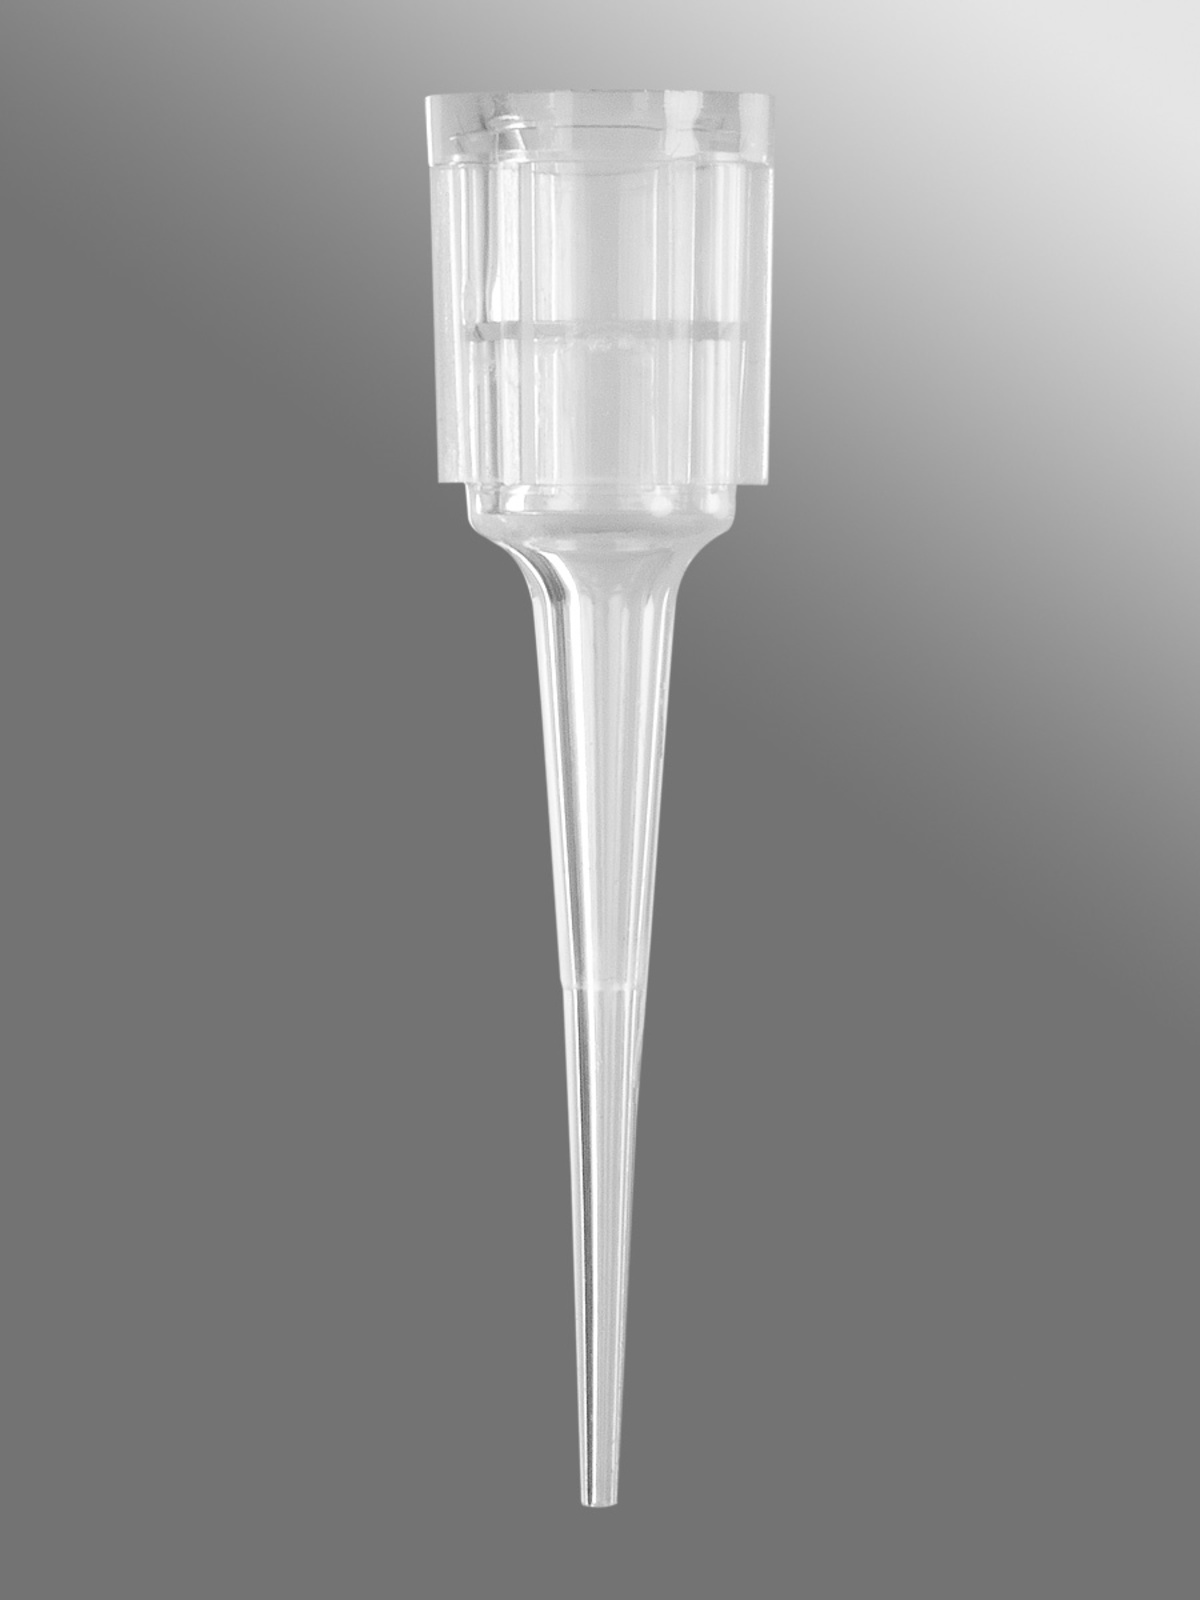 10ul Pipet Tips for Beckman FX Robotics System